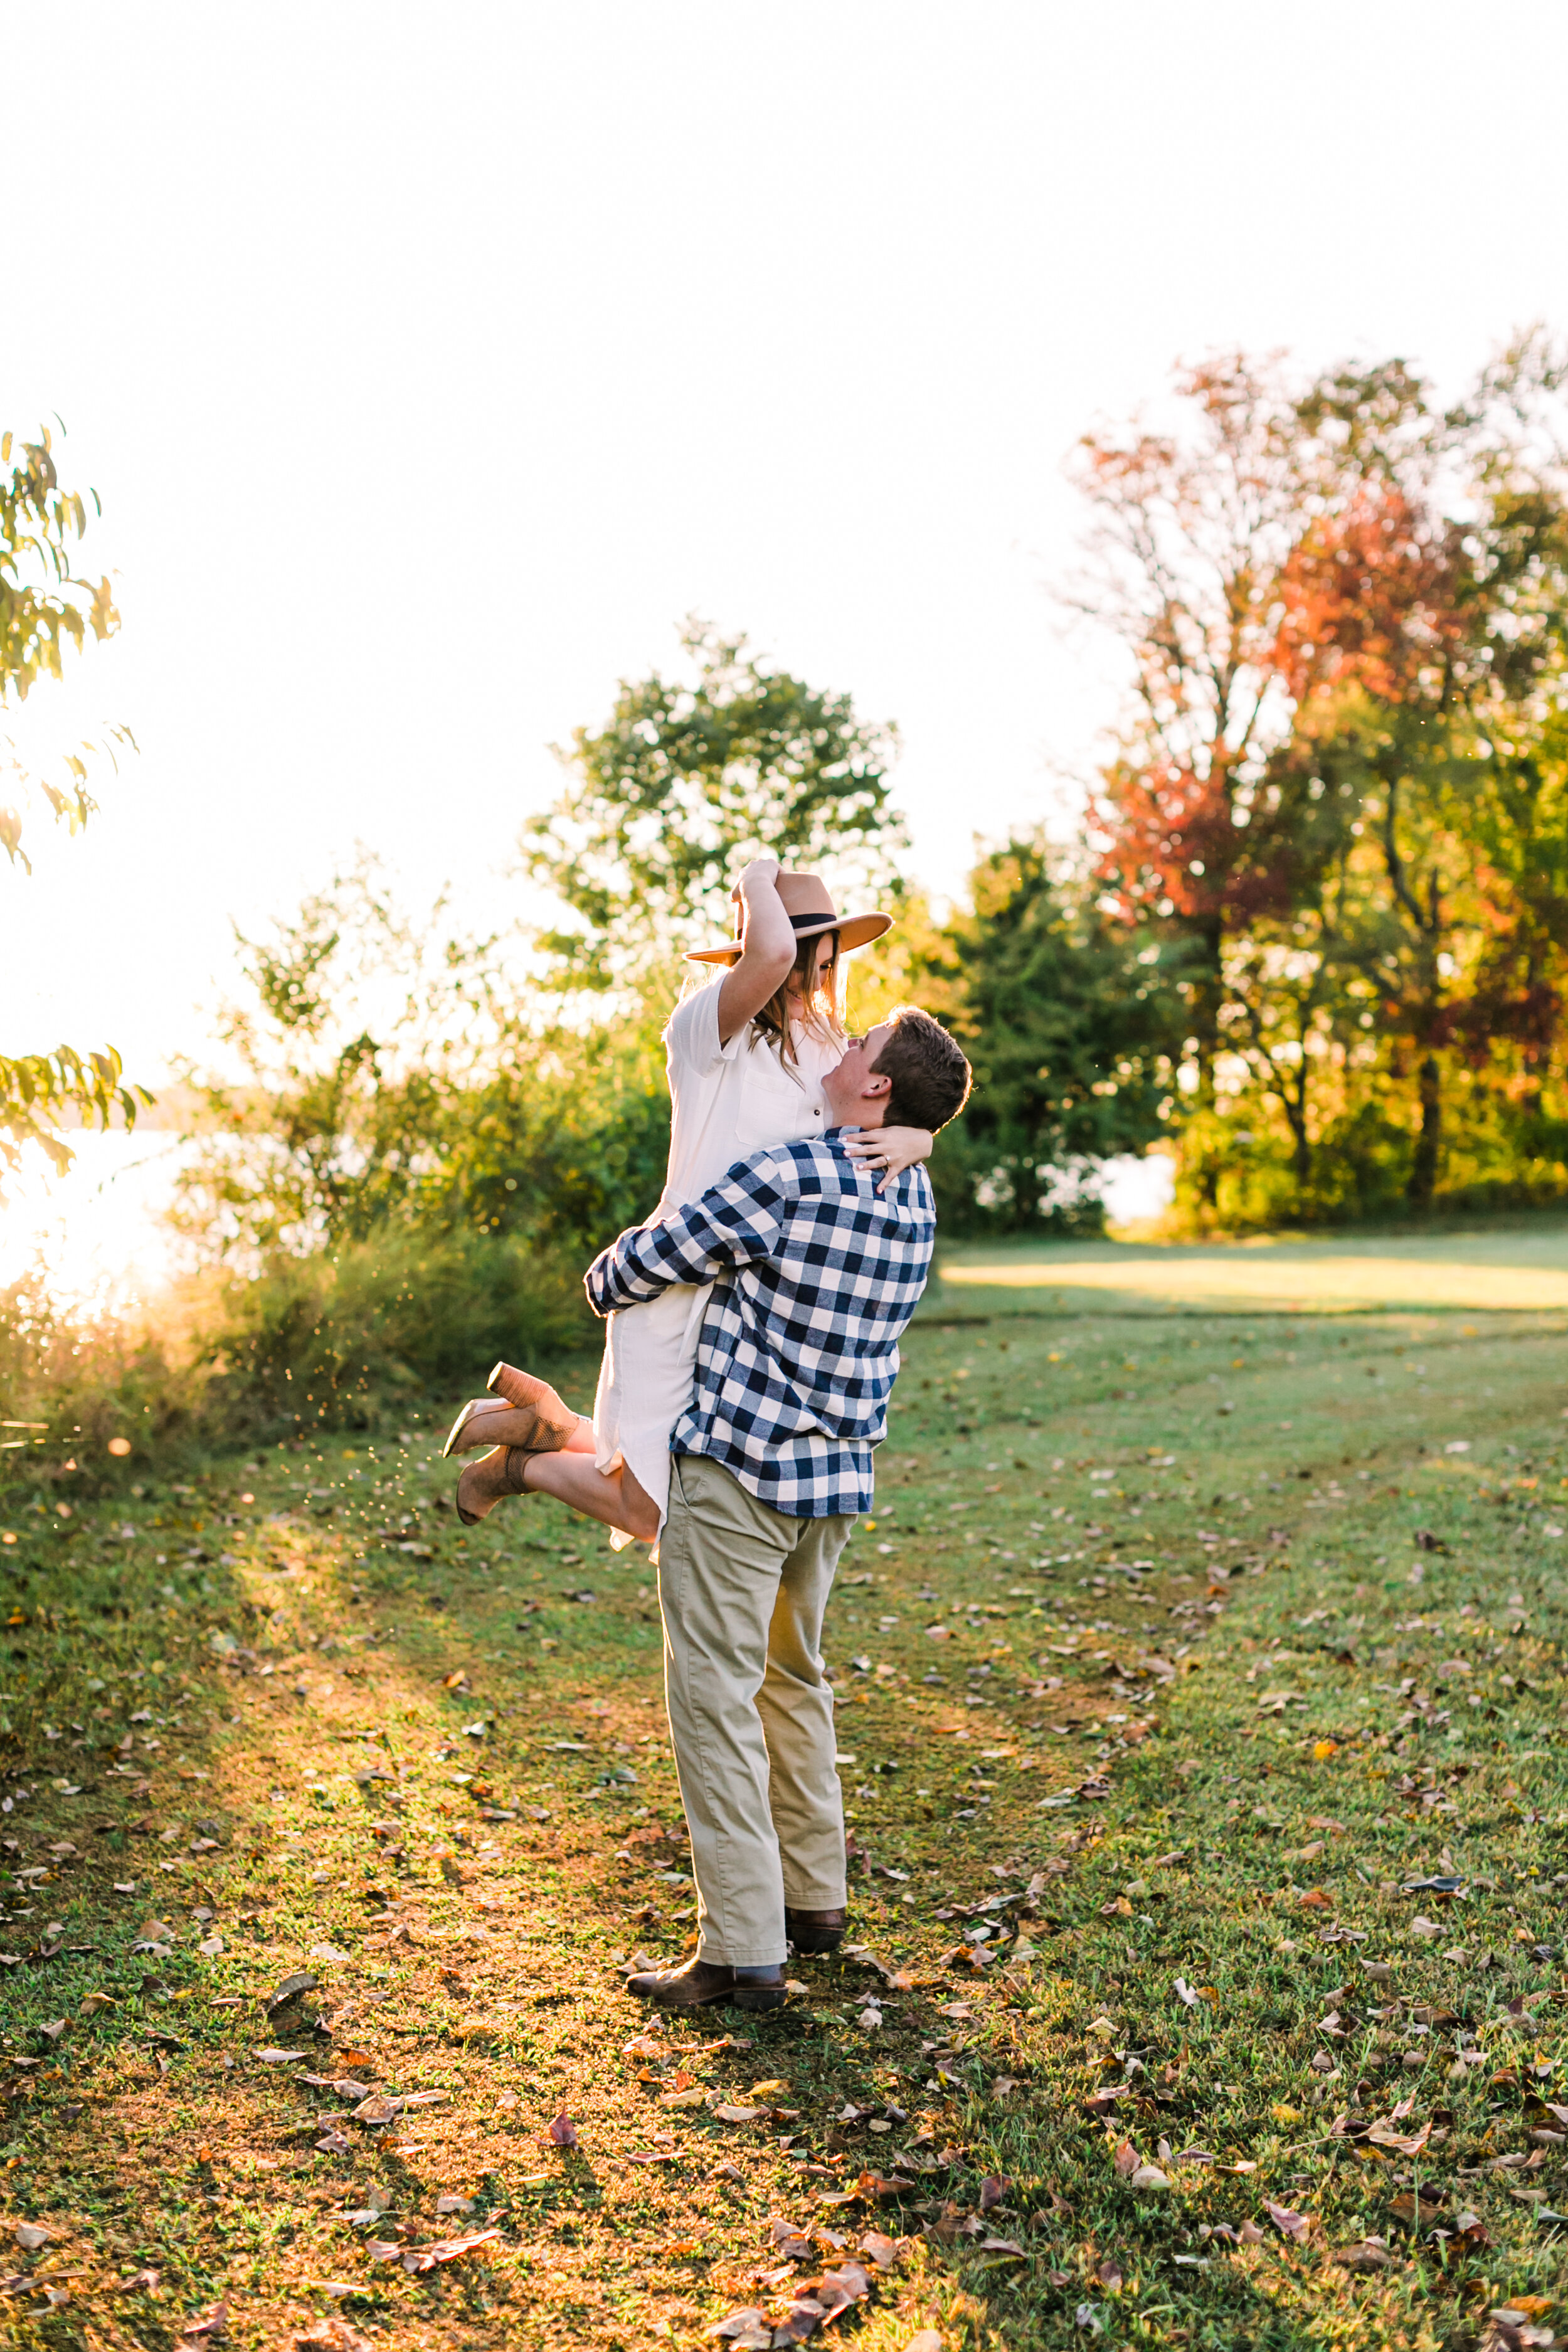 Tennessee+Fall+Engagement+Photos+Puppy (55 of 63).jpg